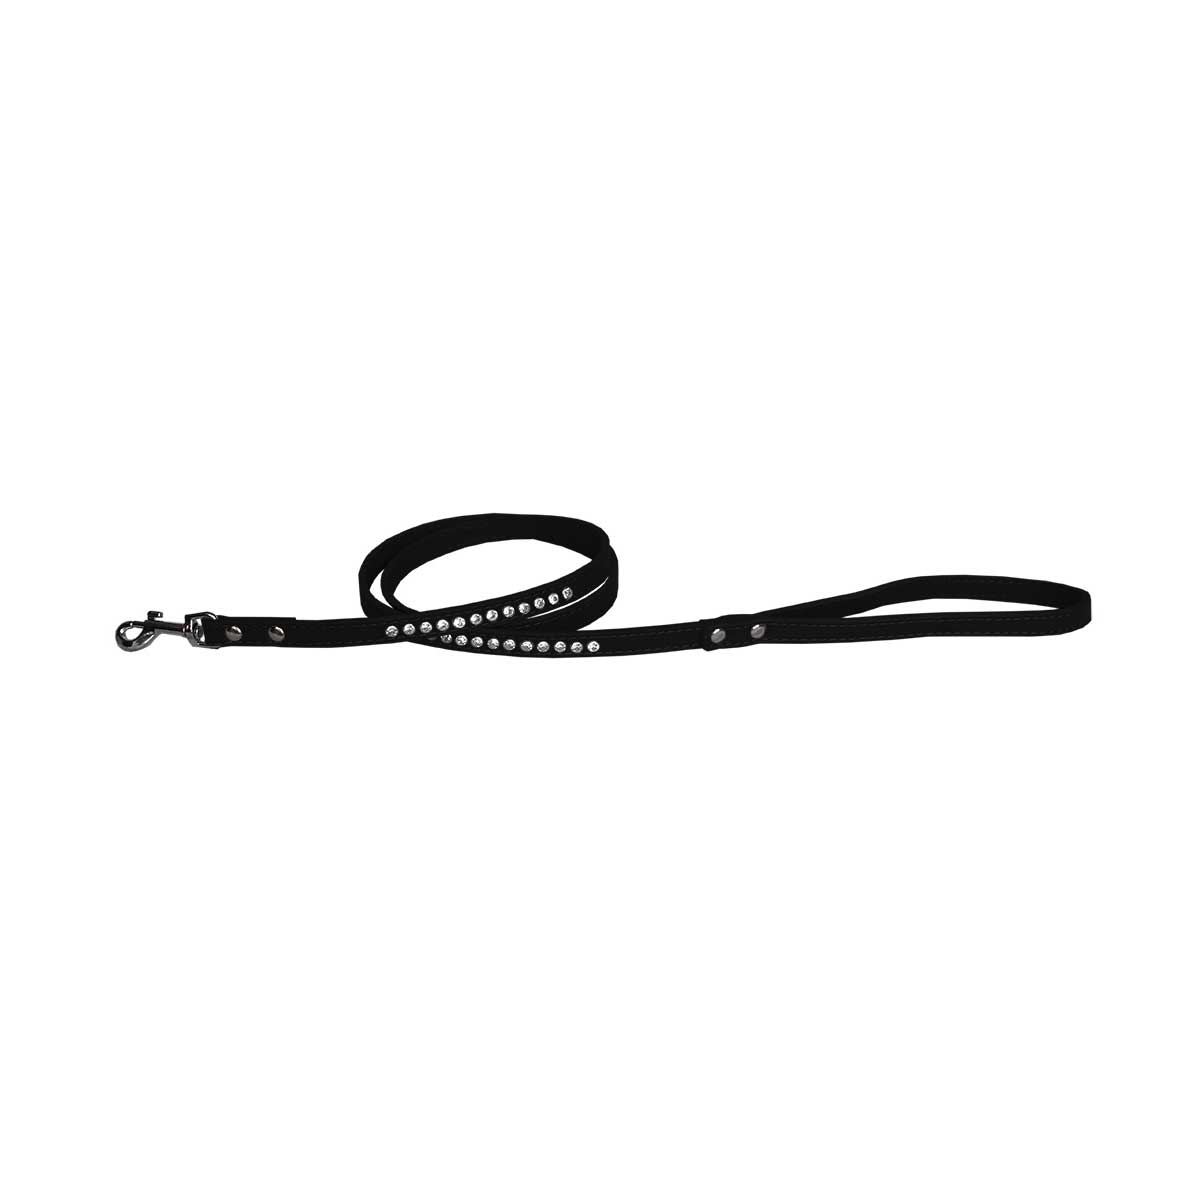 Clear Jewel Faux Leather Pet Leash in Black | Pawlicious & Company